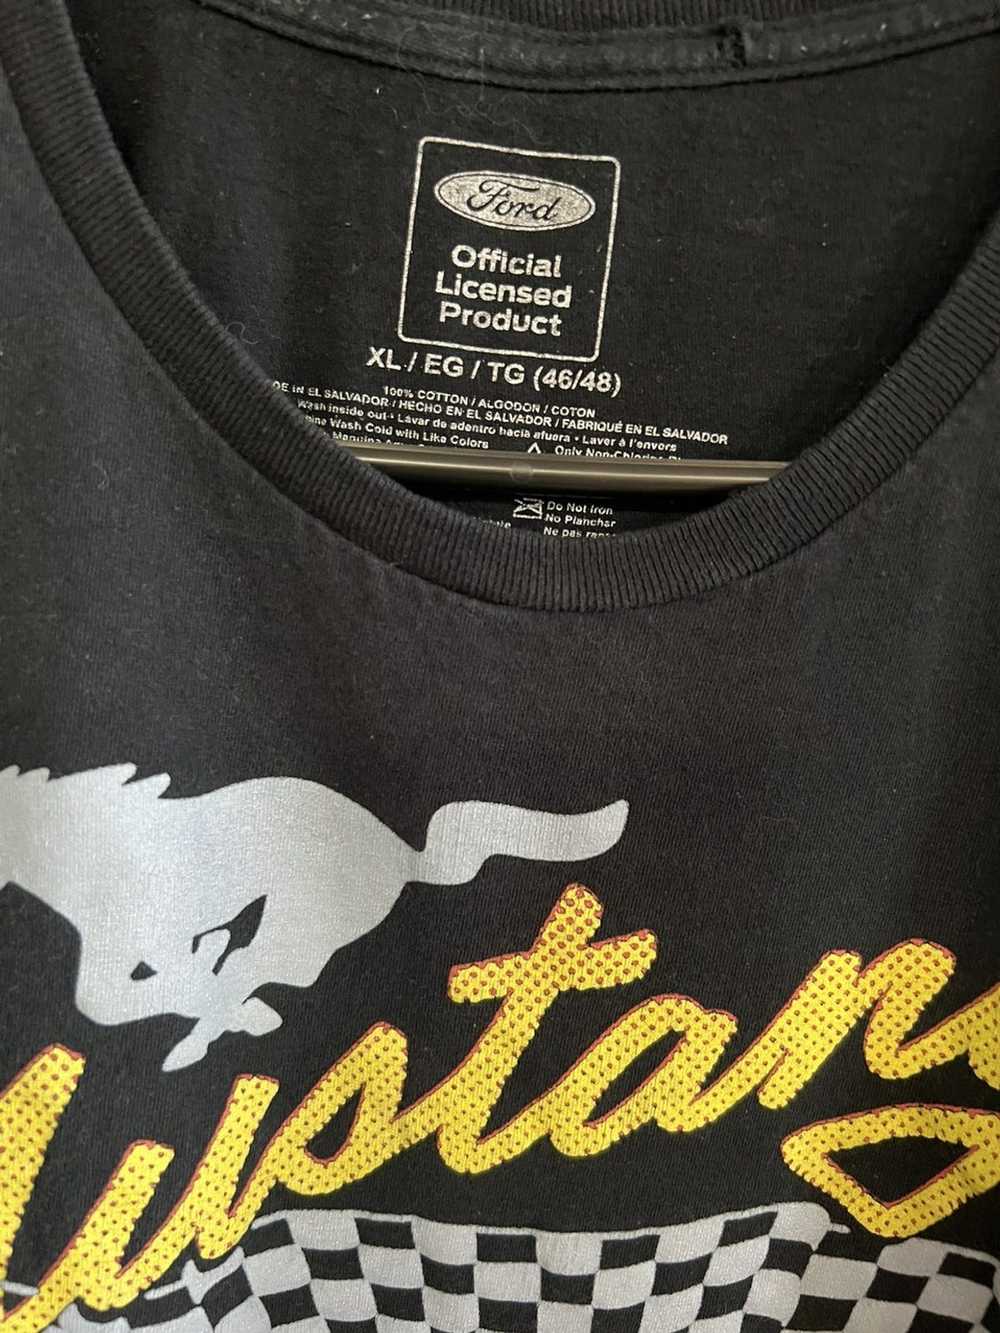 Vintage Vintage Ford Mustang Graphic Tee Size XL - image 3